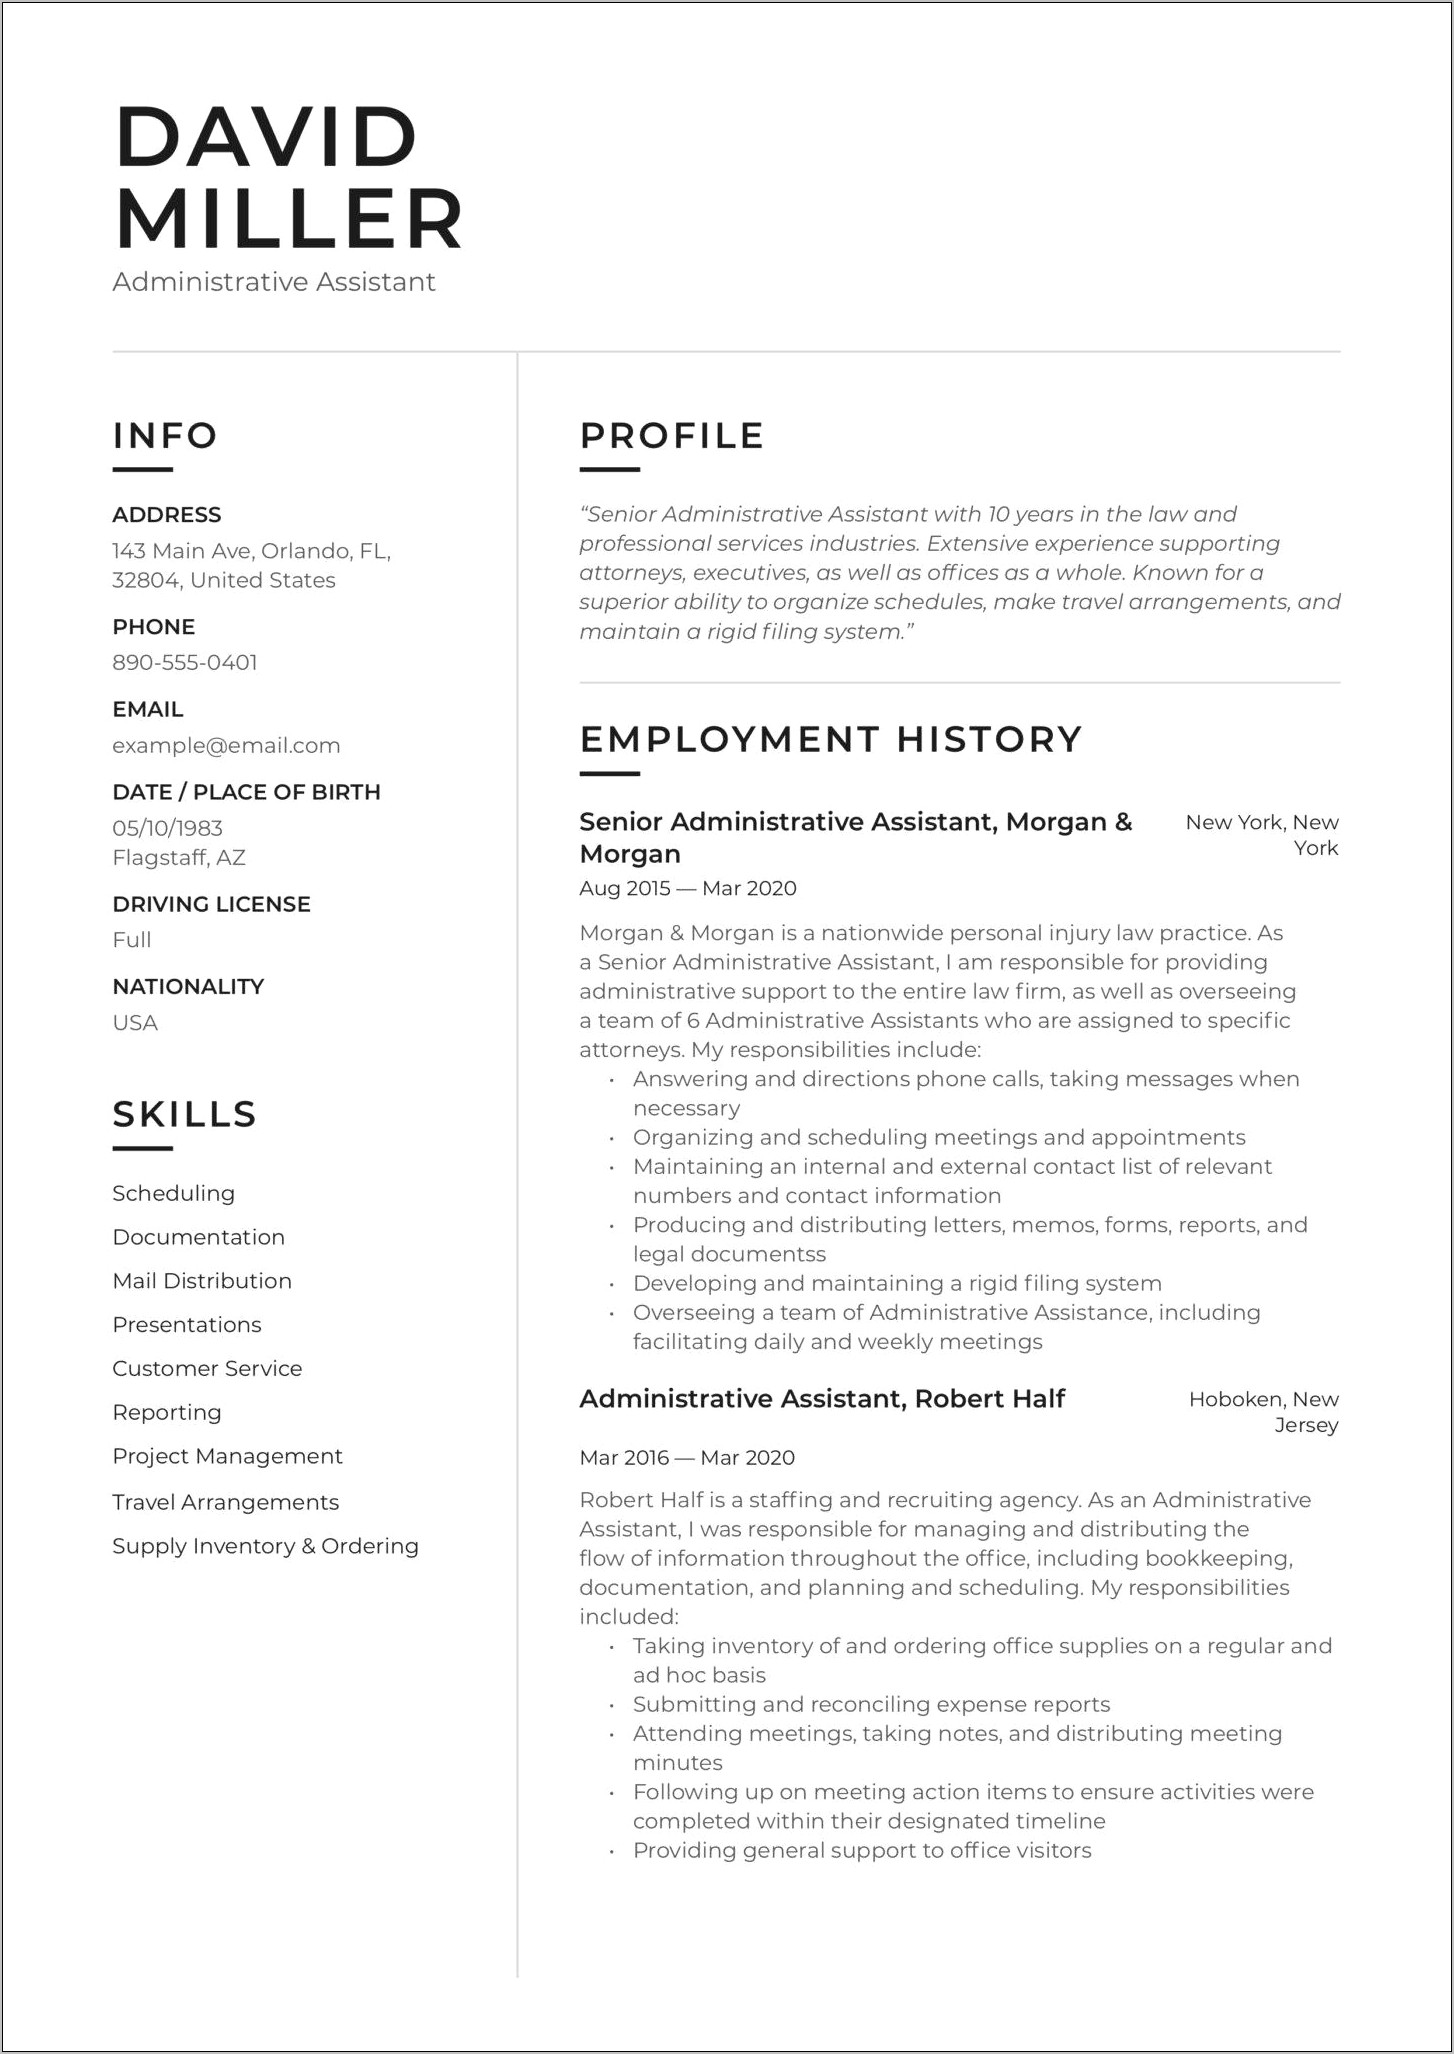 Resume Sample Format For Administrative Assistant